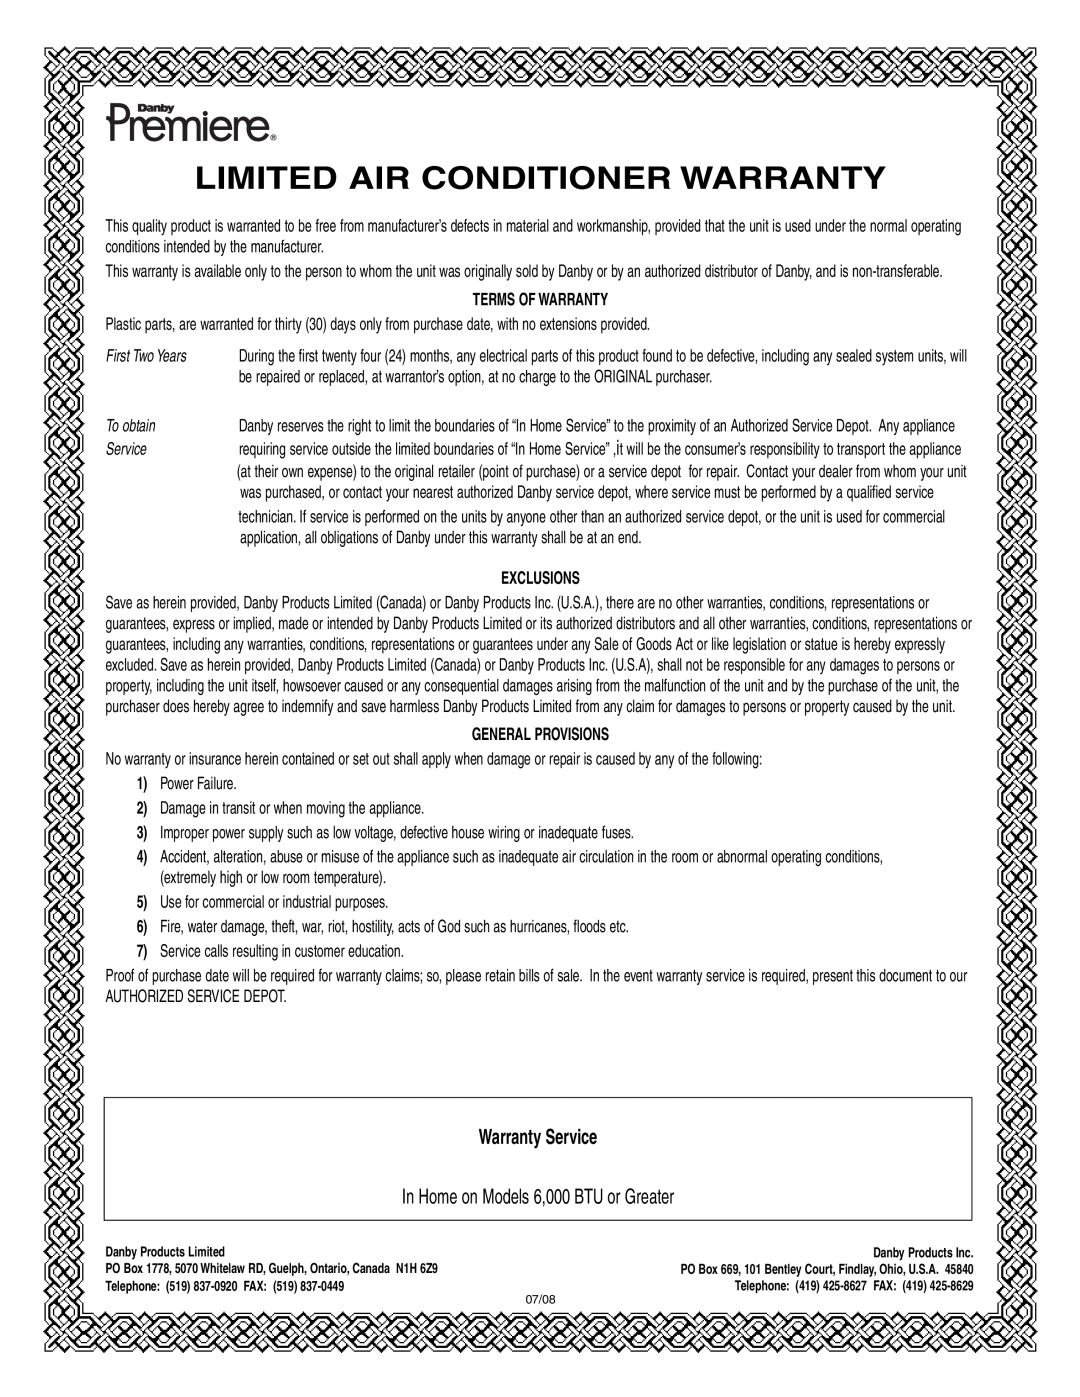 Danby DPAC 9009 Warranty Service, In Home on Models 6,000 BTU or Greater, Limited Air Conditioner Warranty, To obtain 